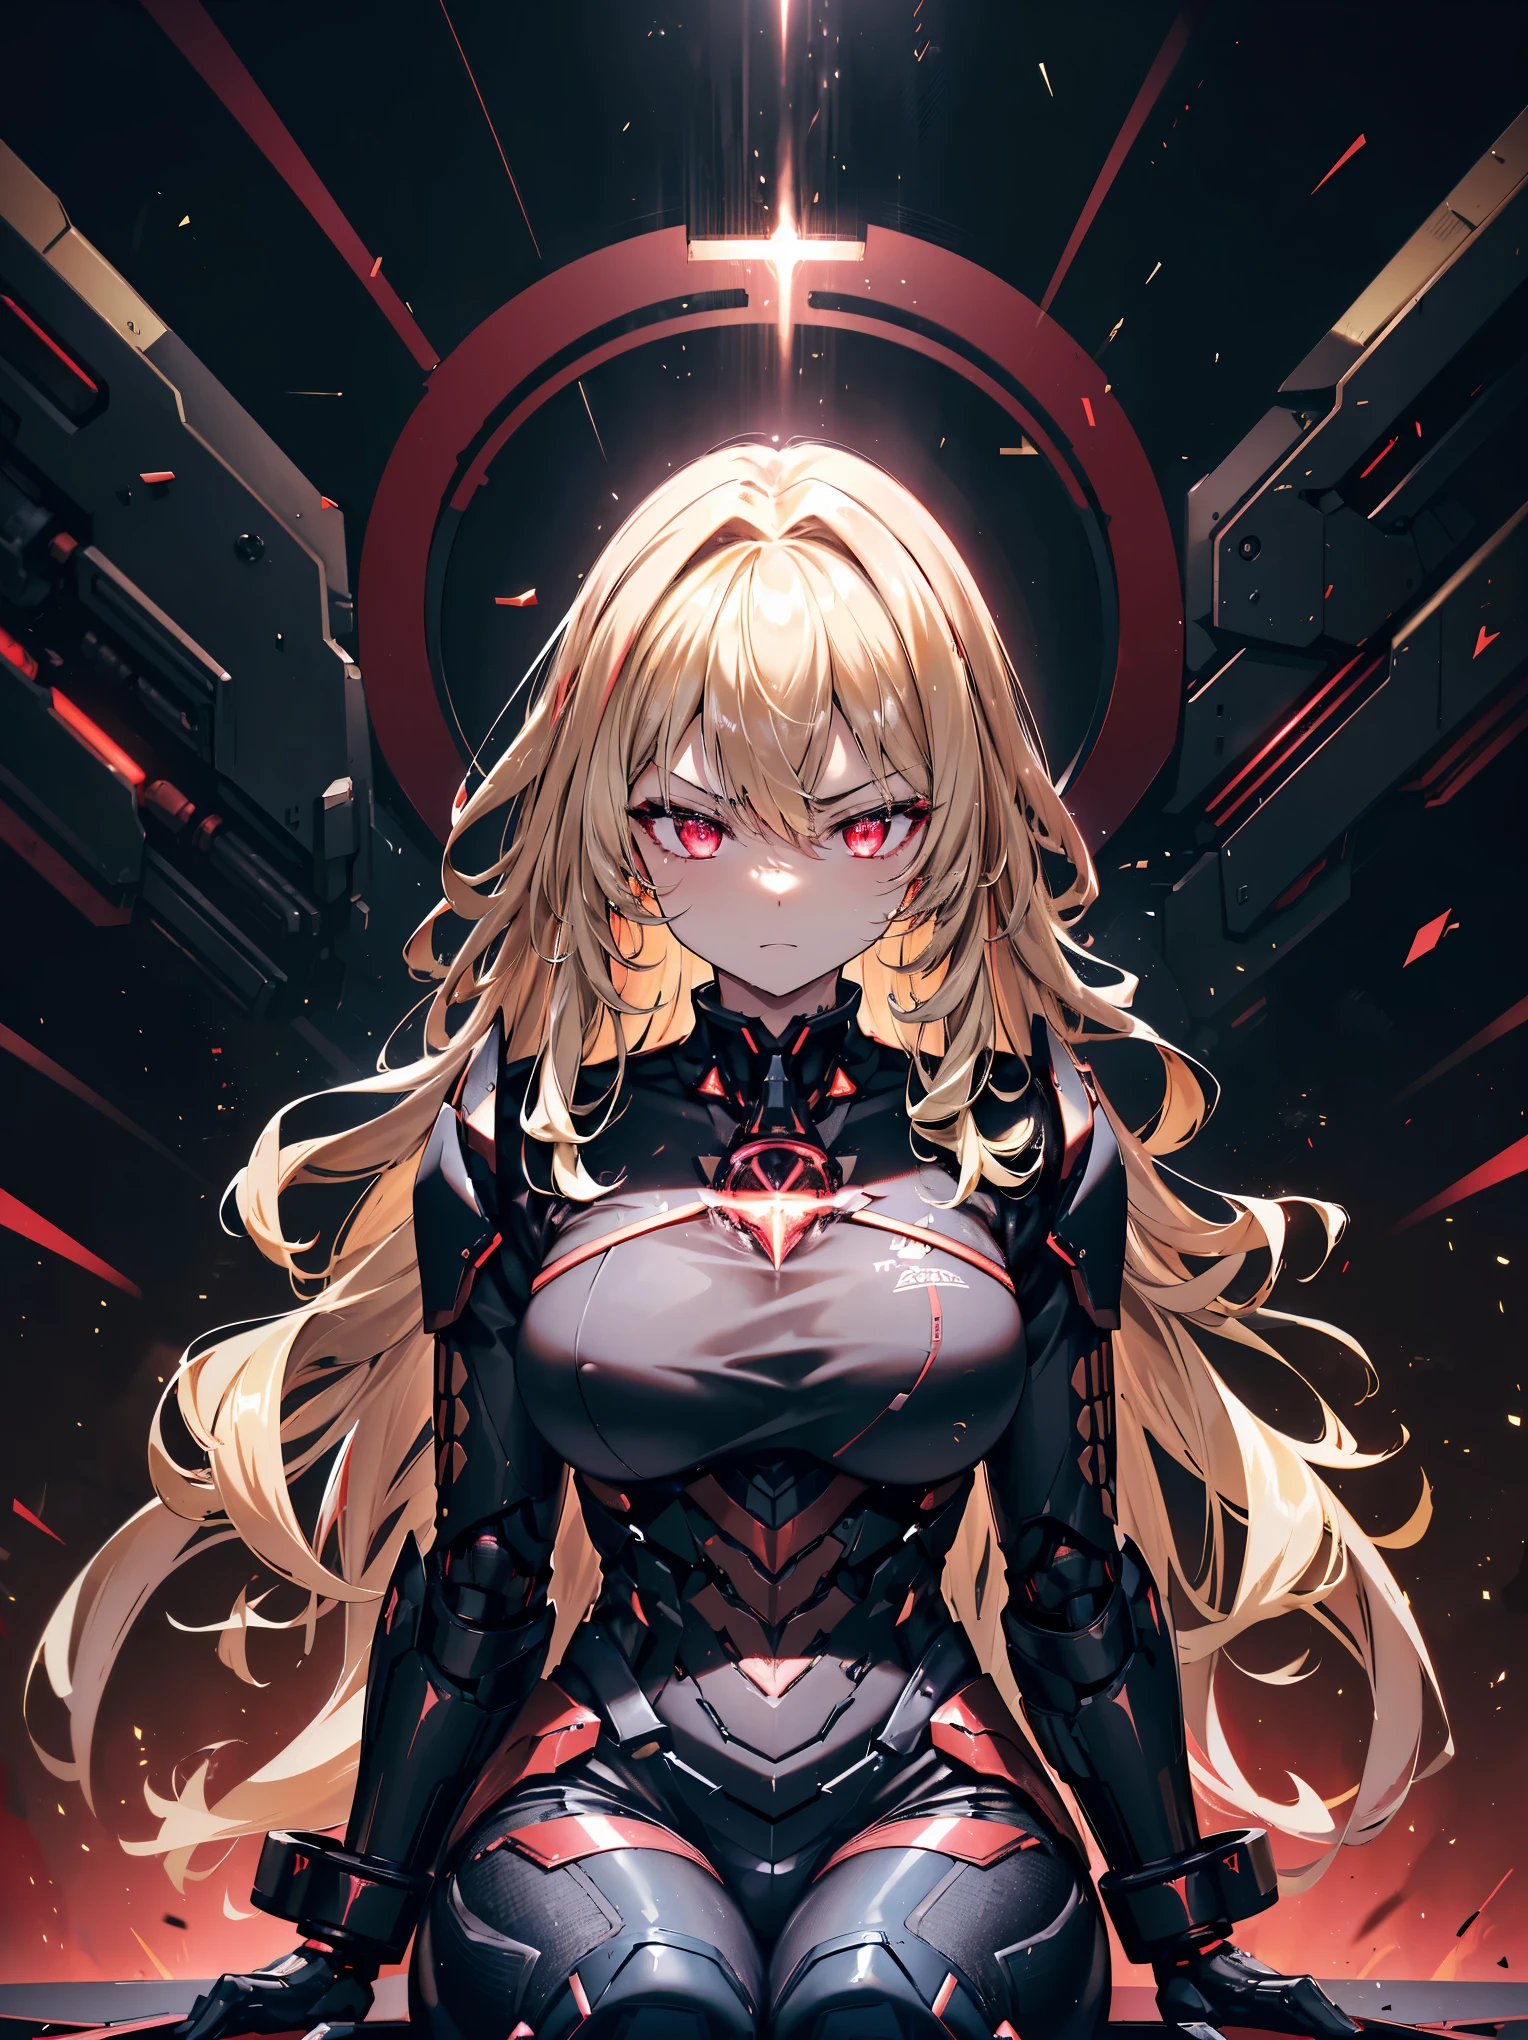 (Armed female warrior with curves and strong muscles), (Evil look), ((Voluminous wavy blonde hair)), Glowing red eyes, ((She has a large high-tech dark red star on her chest.)), Sophisticatedディテール, (Sophisticated, Wear high-tech, futuristic black:70 and dark red:90 タクティカルスカートを備えたSophisticated鎧), Highly militarized, ((Sideways threatening pose)), ((Sitting sideways in a spaceship)), (Holographic Numbers、symbol、Surrounded by stars。), 最high quality, Sharp and clear lines, high quality, 8K Professional Image
